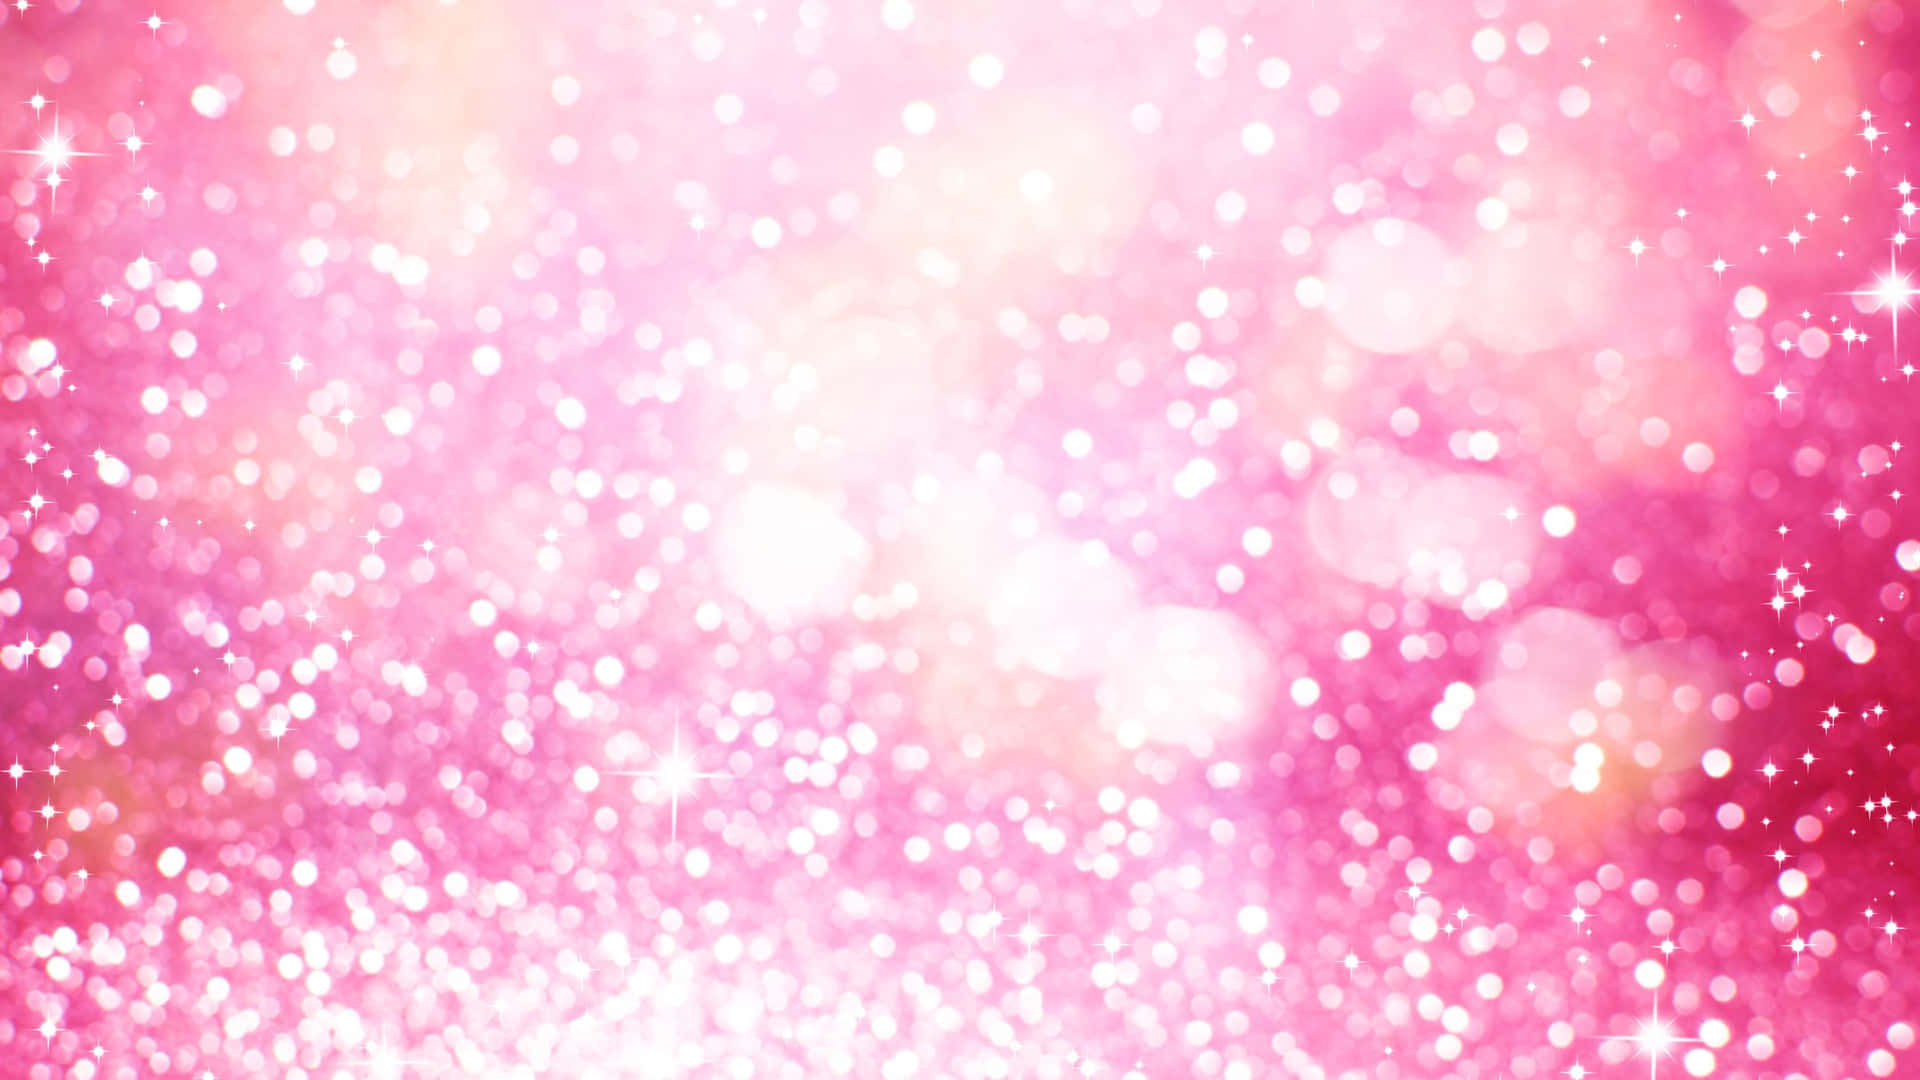 Glistening Sparkly Pink With Bokeh Background